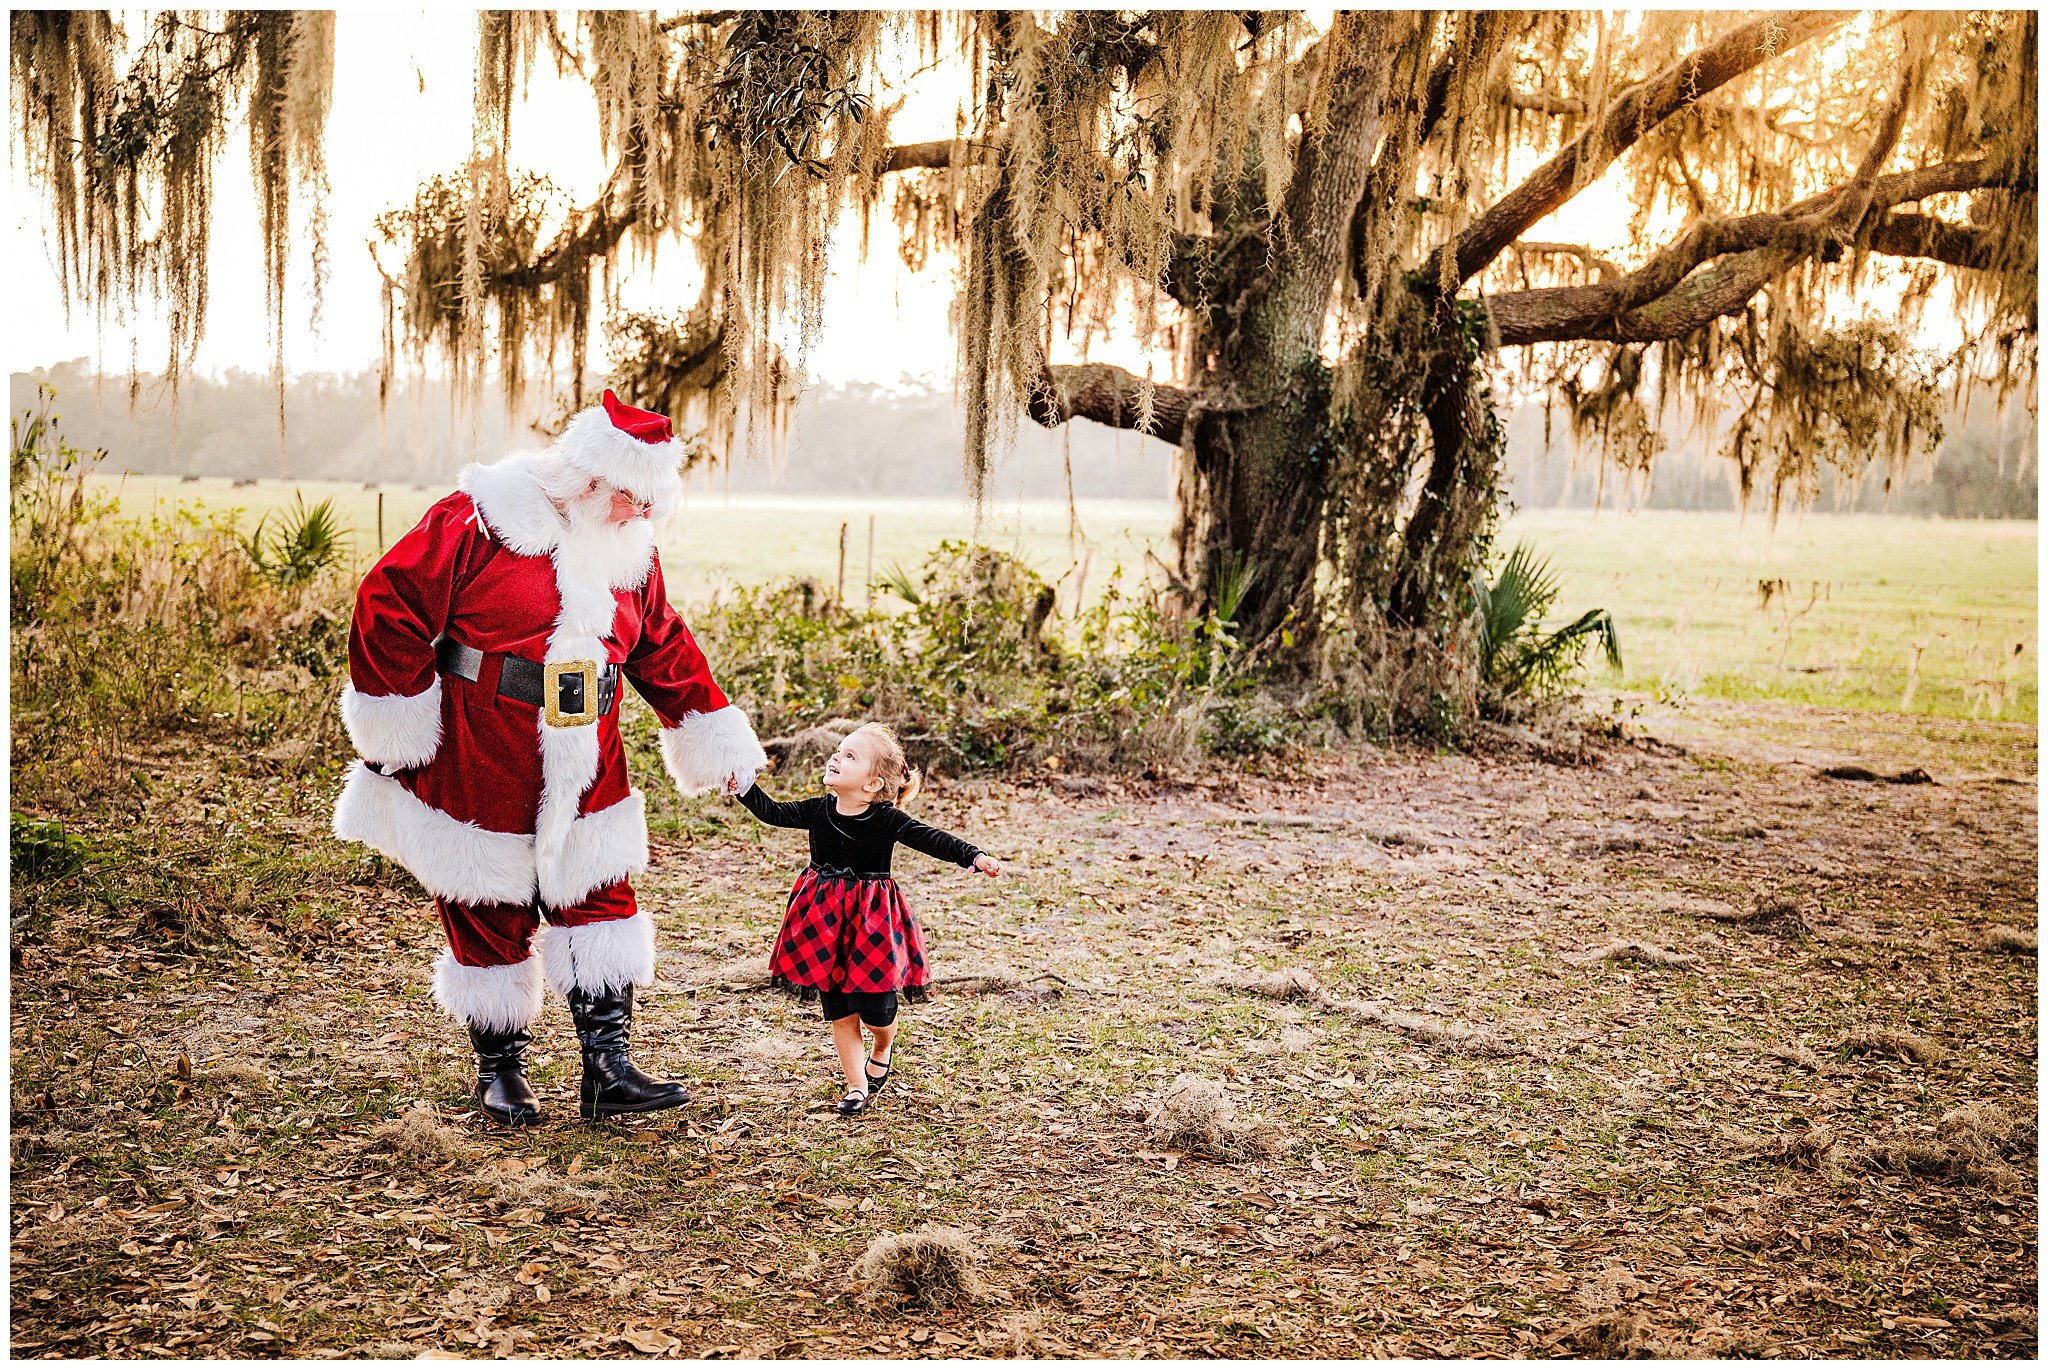 Young child walking with Santa Claus in an outdoor park near Orlando, Florida